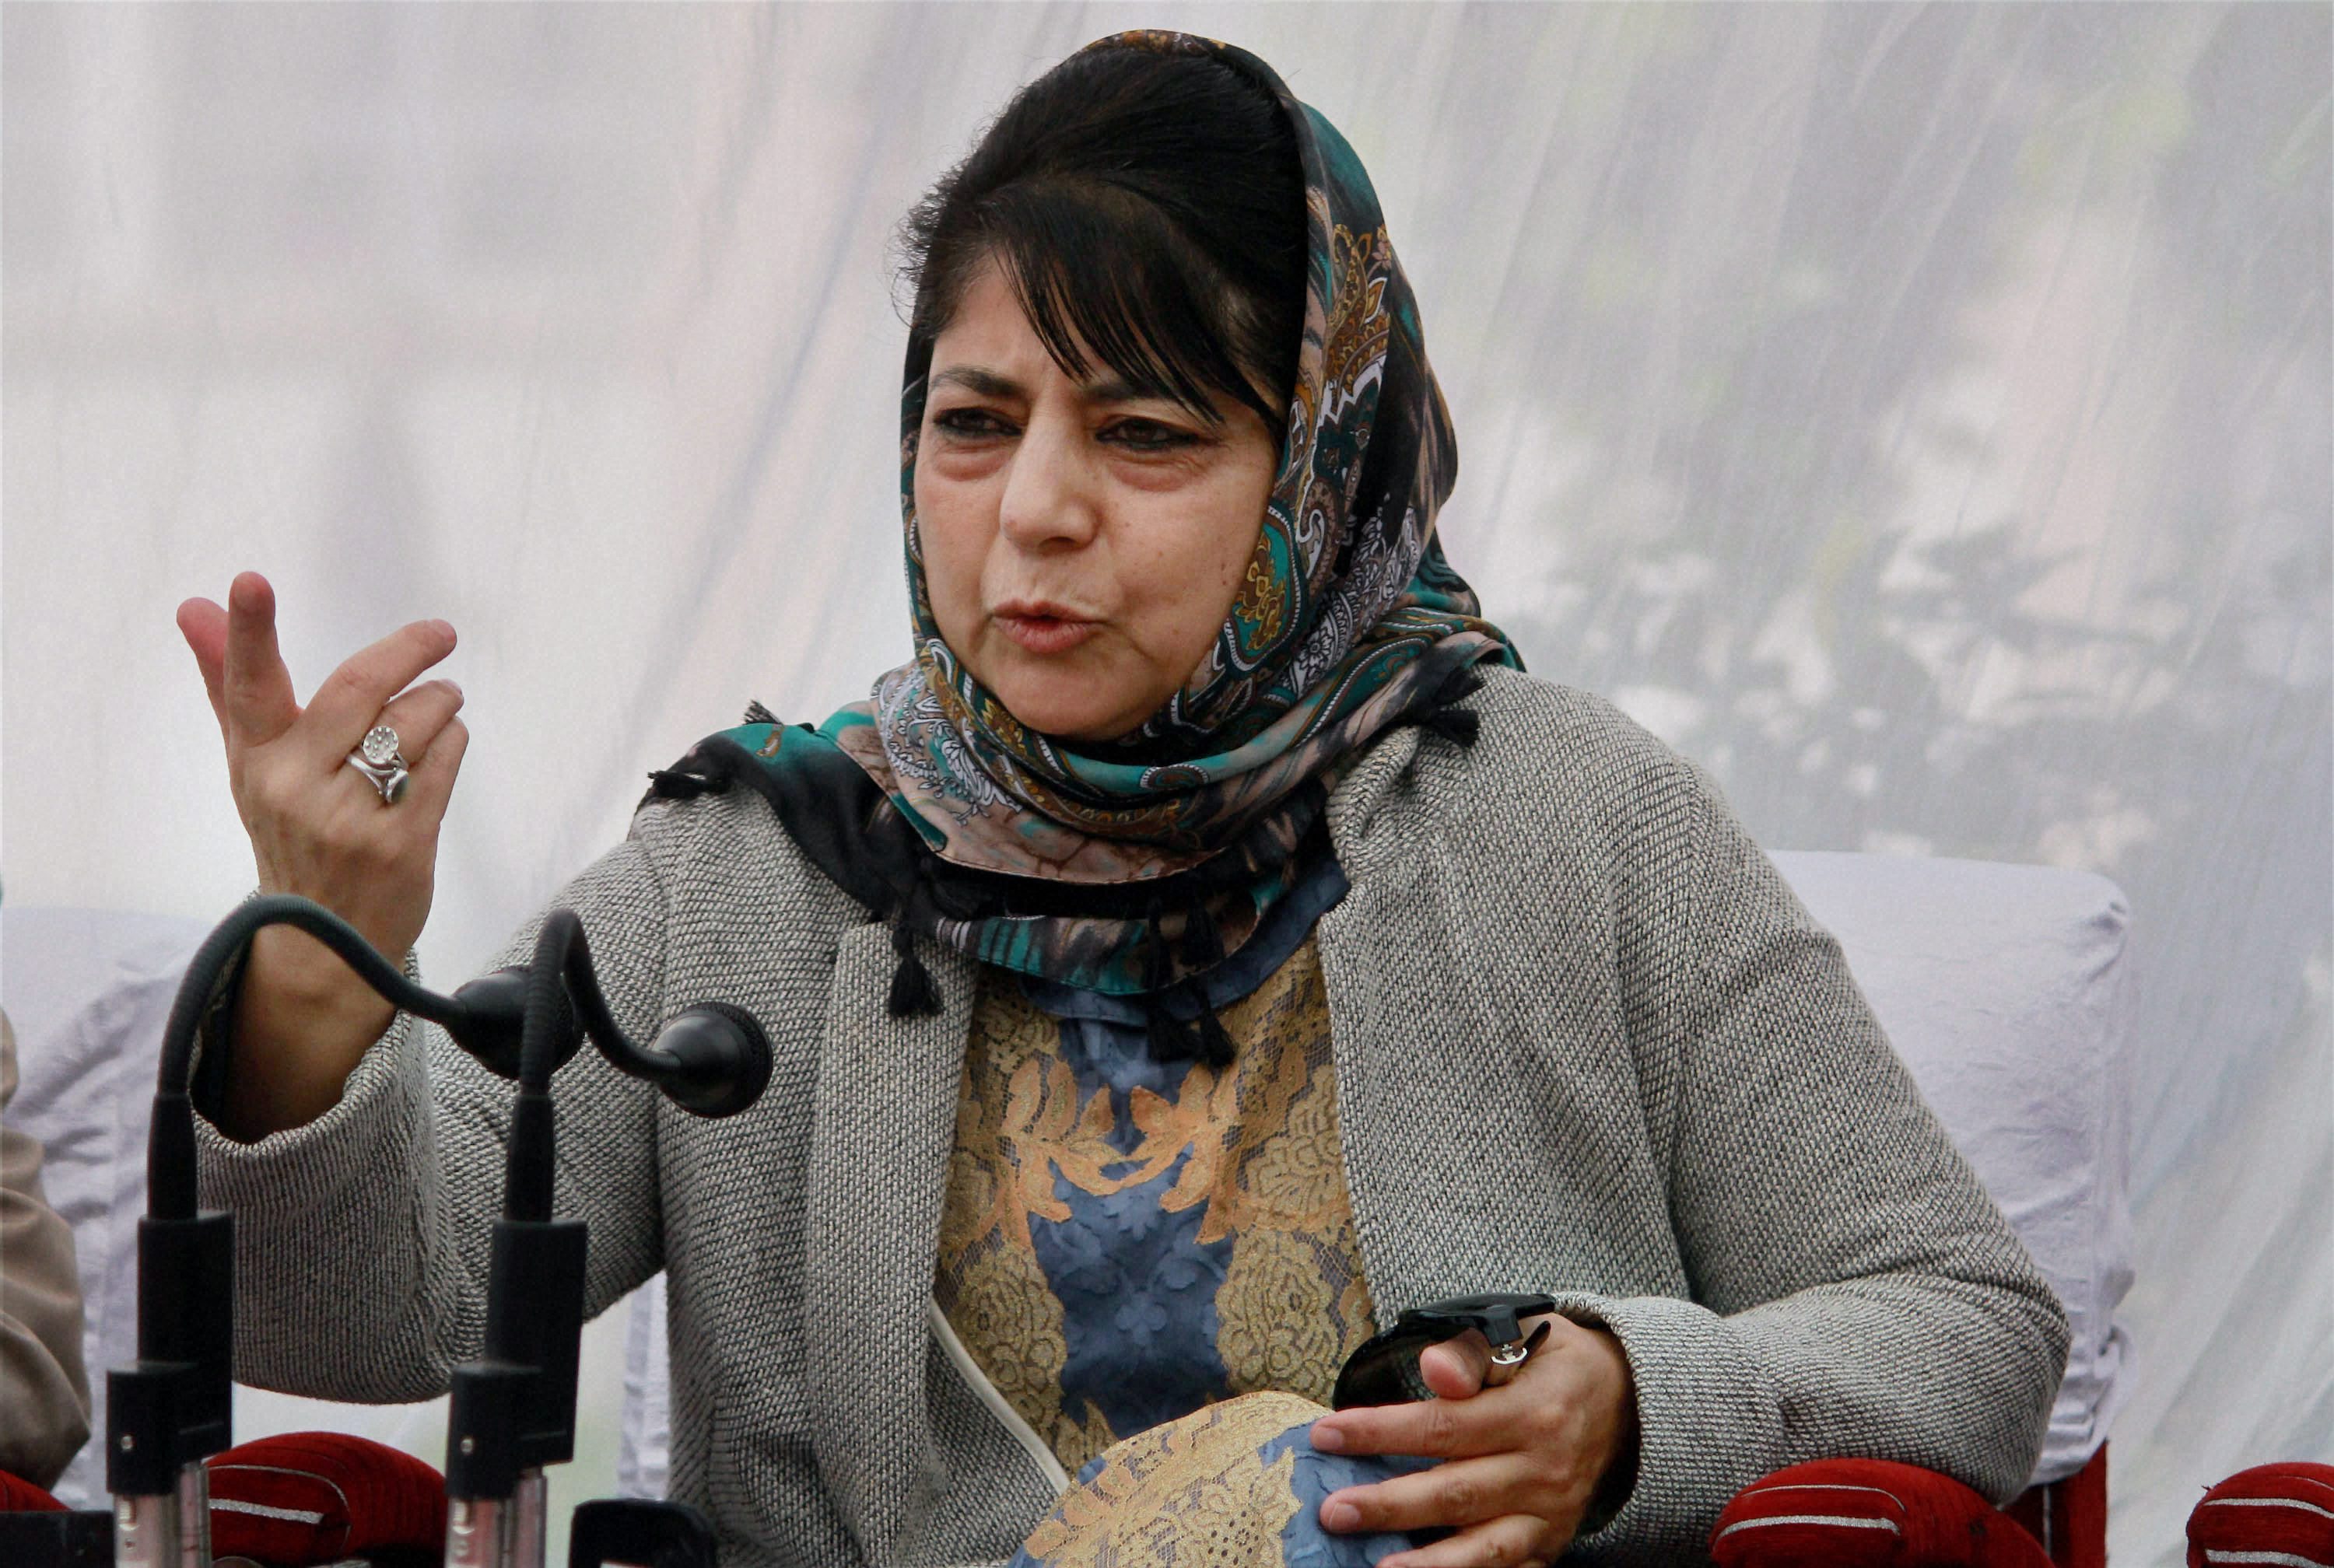 From spreading COVID-19 to killing elephant, Muslims being blamed for every problem: Mehbooba Mufti